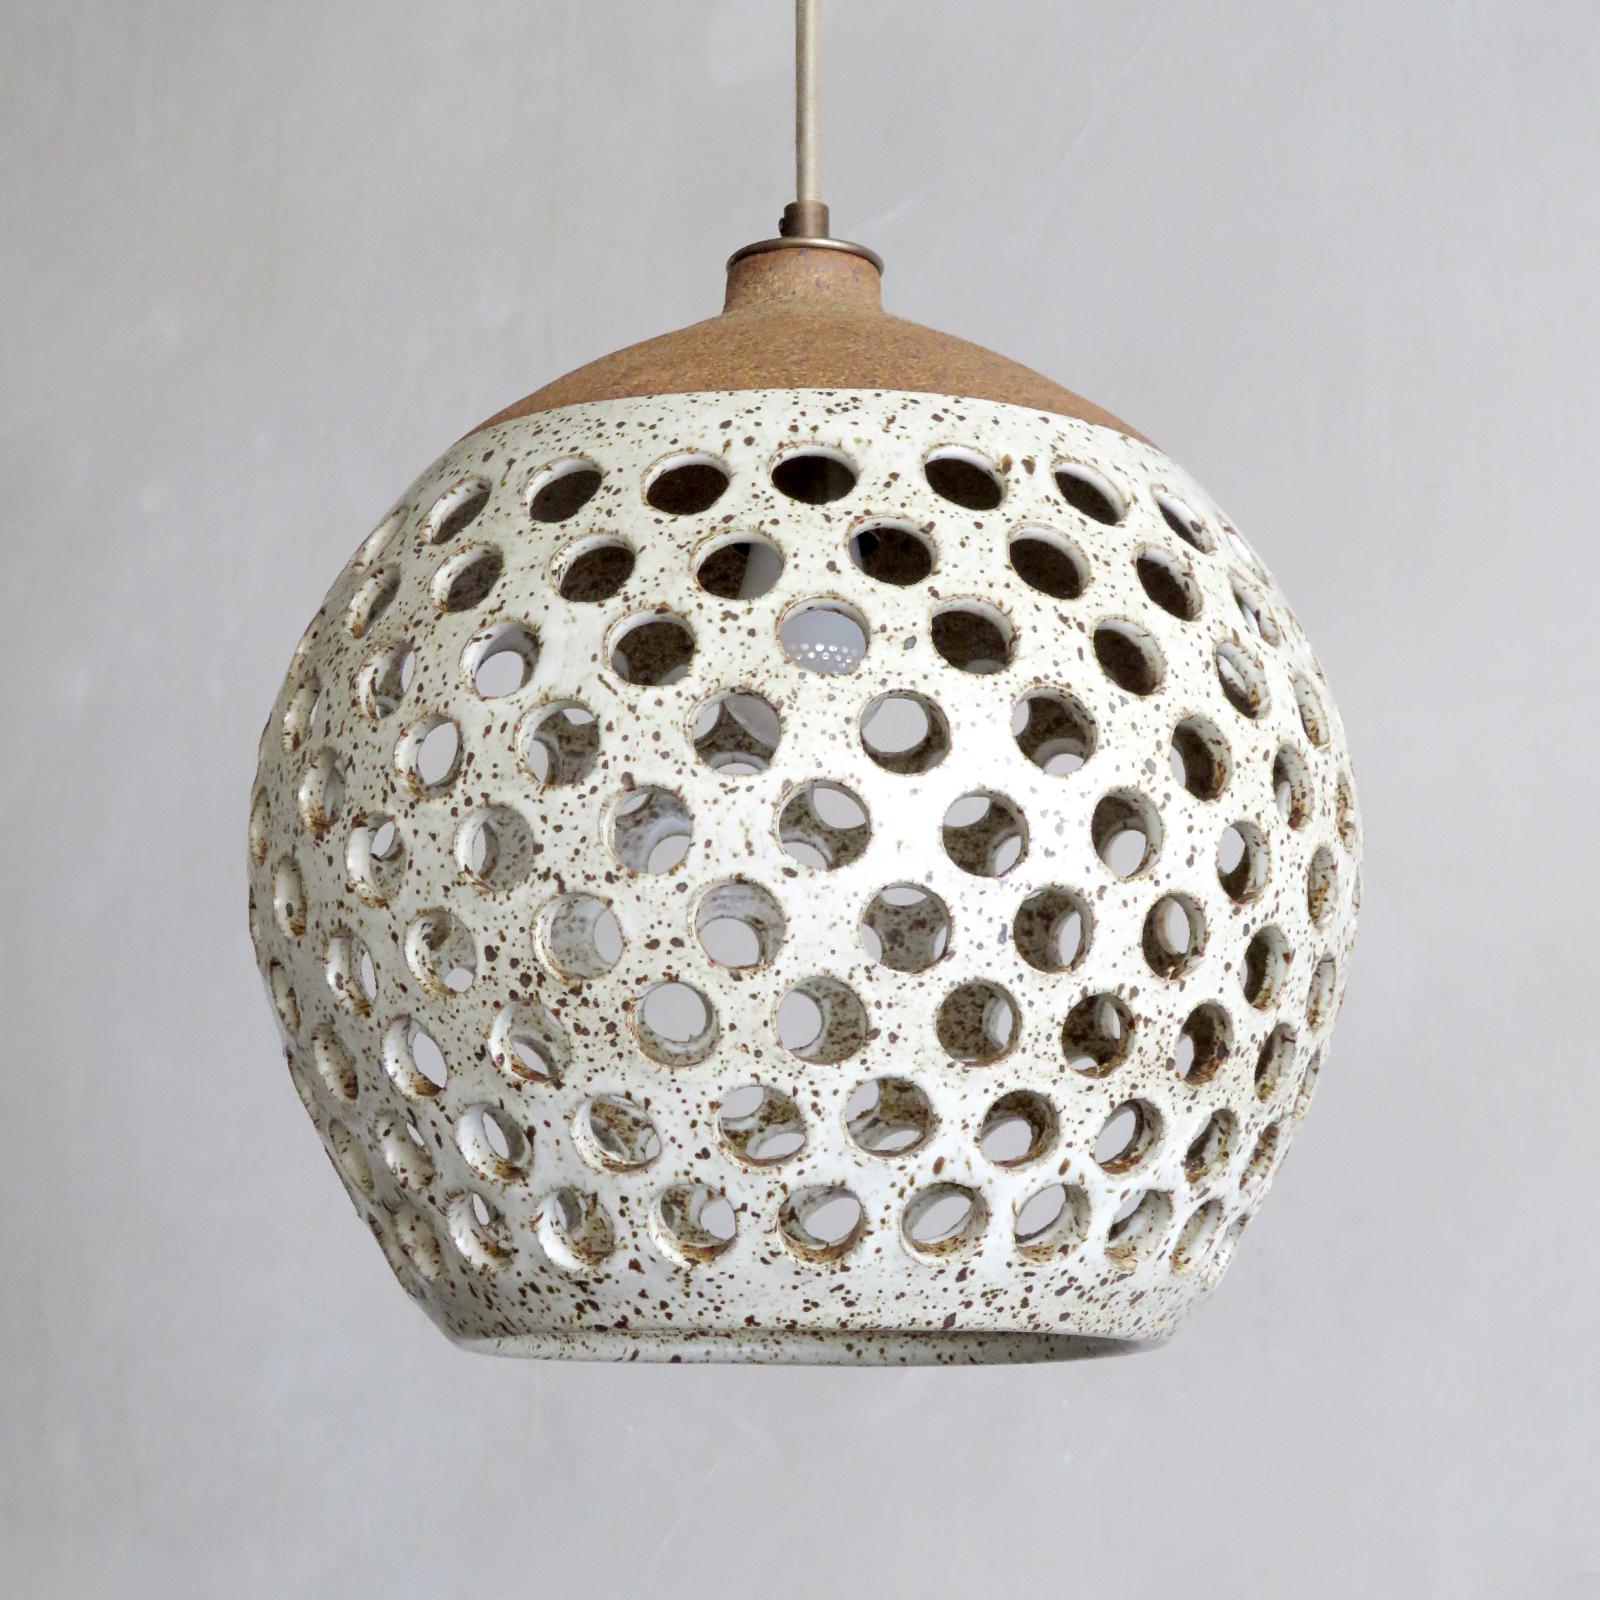 Wonderful ceramic pendant light No. L519, designed and handcrafted by Los Angeles based ceramicist Heather Levine. High fired stoneware with speckled matte white glaze on a cork colored clay body with decorative circles cut out to expose light in